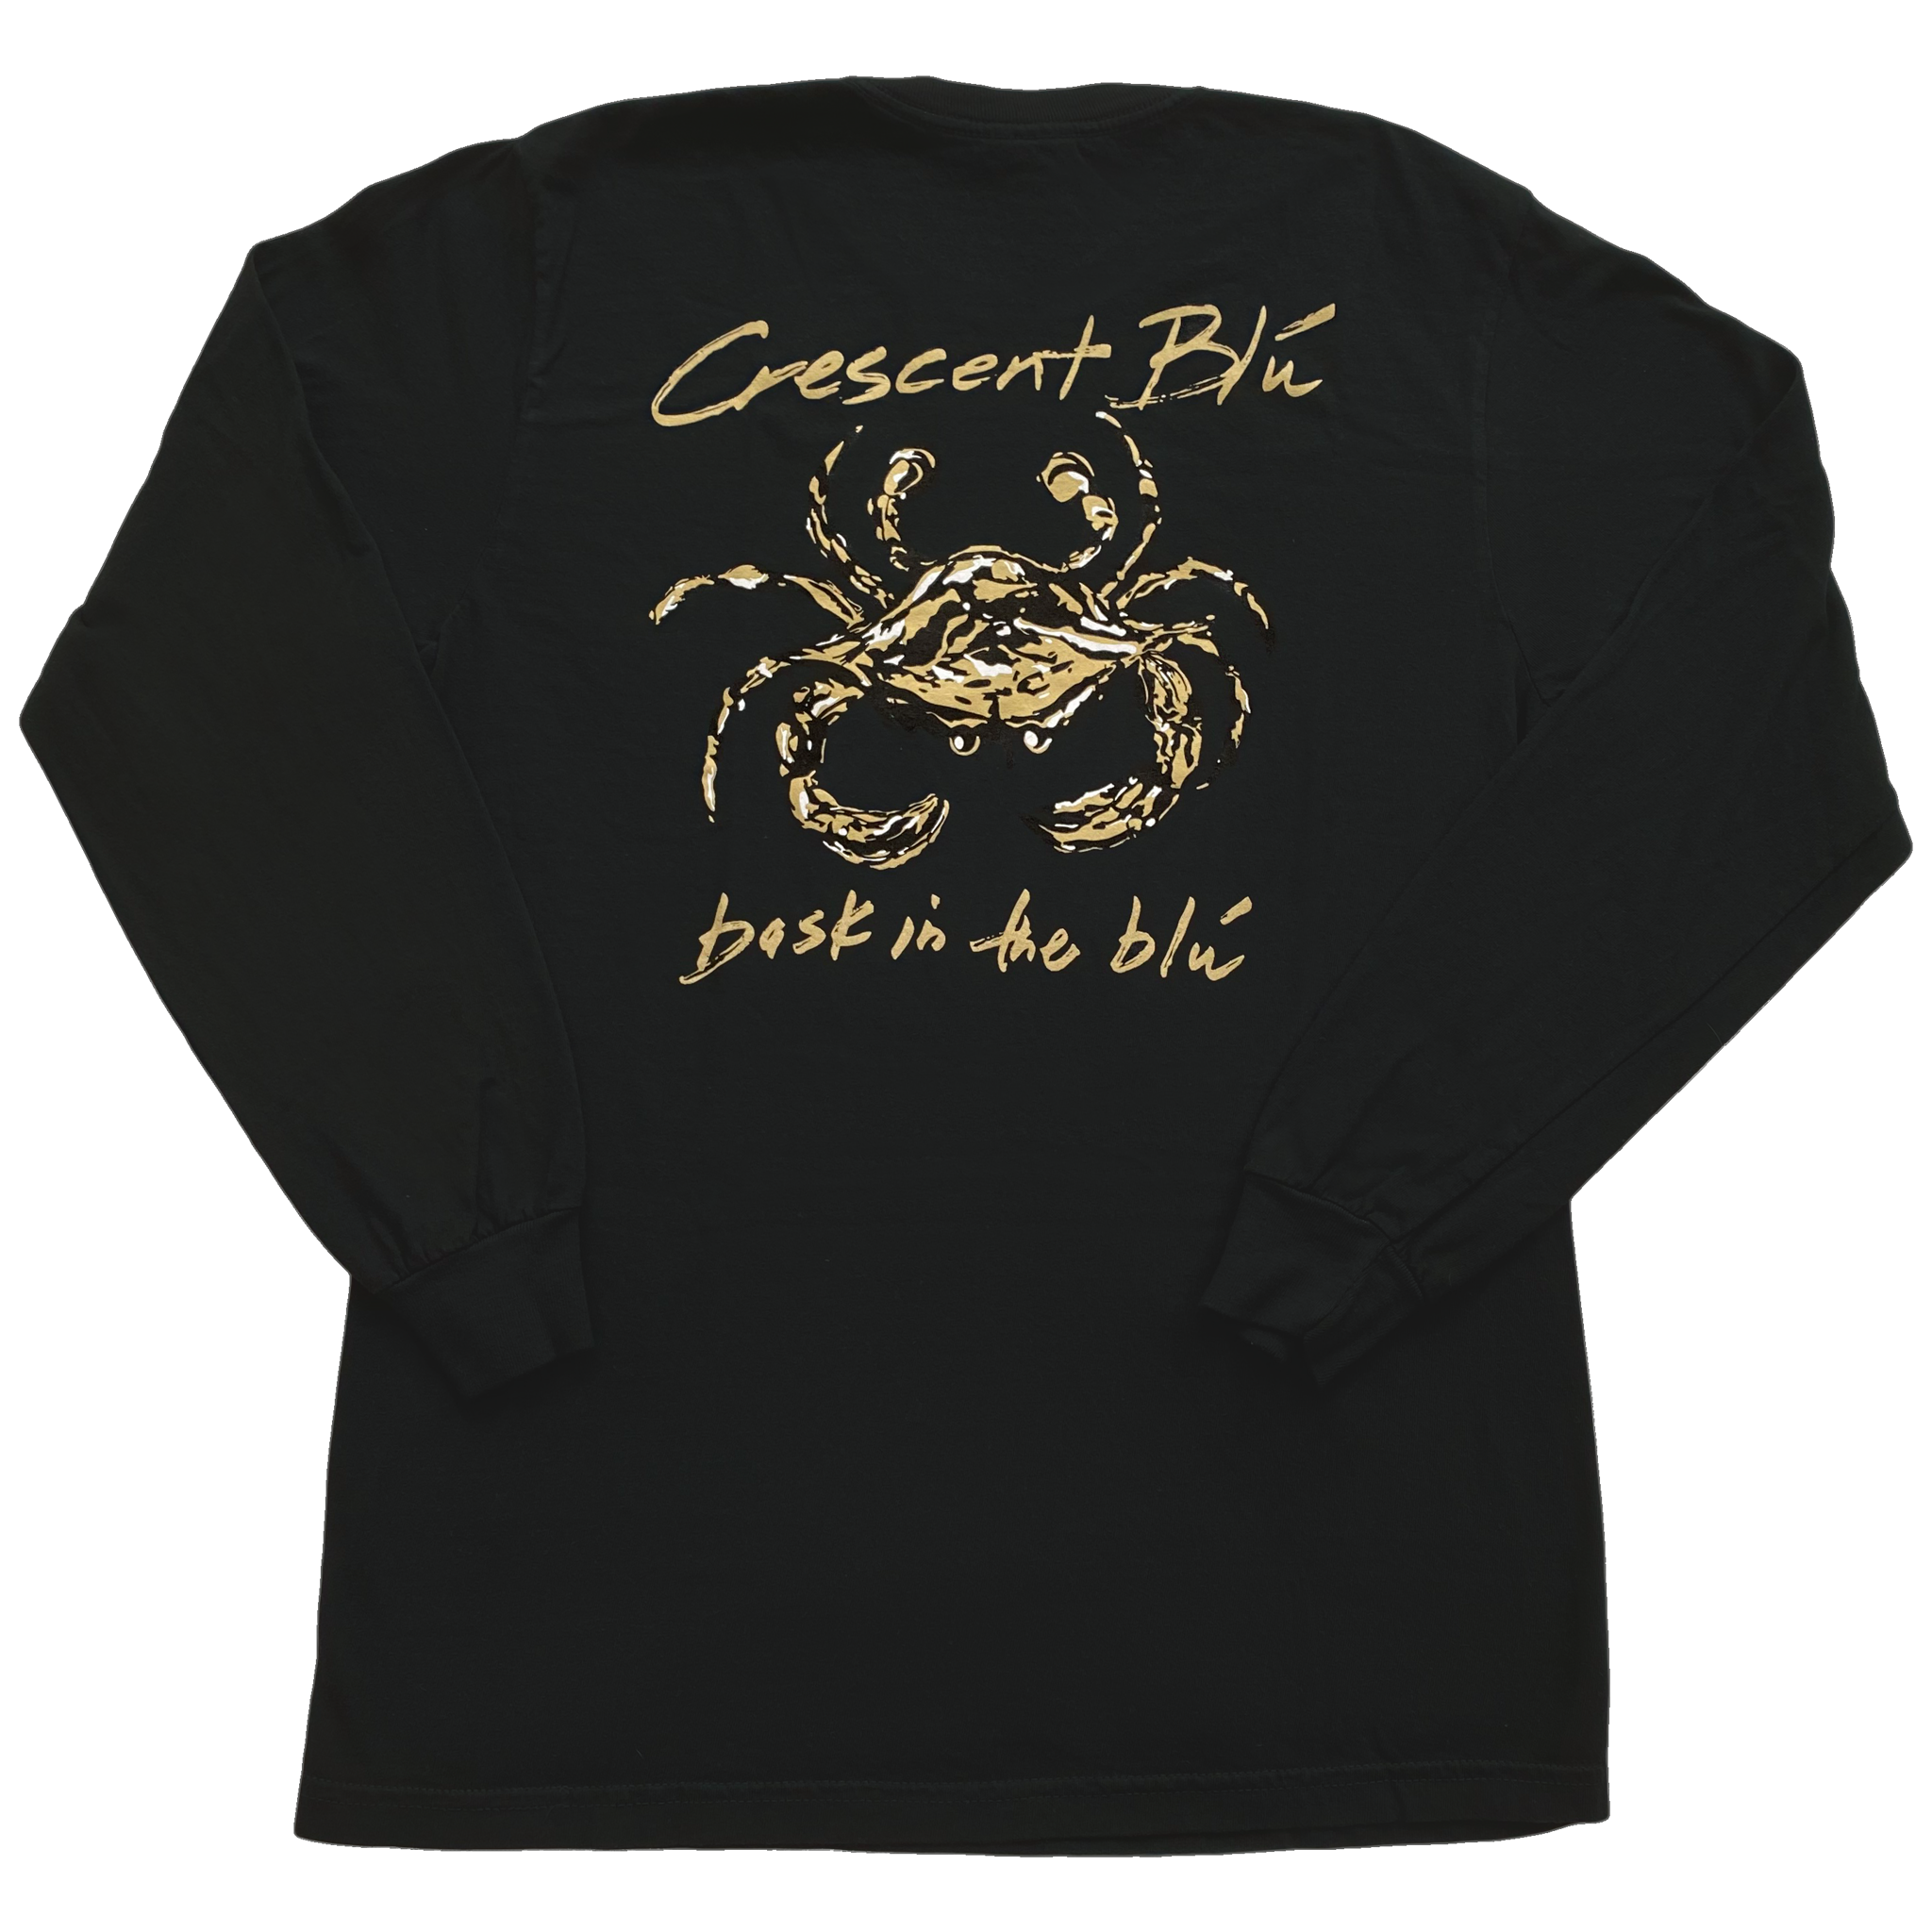 A black, gold, and white crab centered on the back of a black long sleeve crew neck cotton t-shirt. Written in gold above the crab is Crescent Blu, below the crab is bask in the blu written in gold.